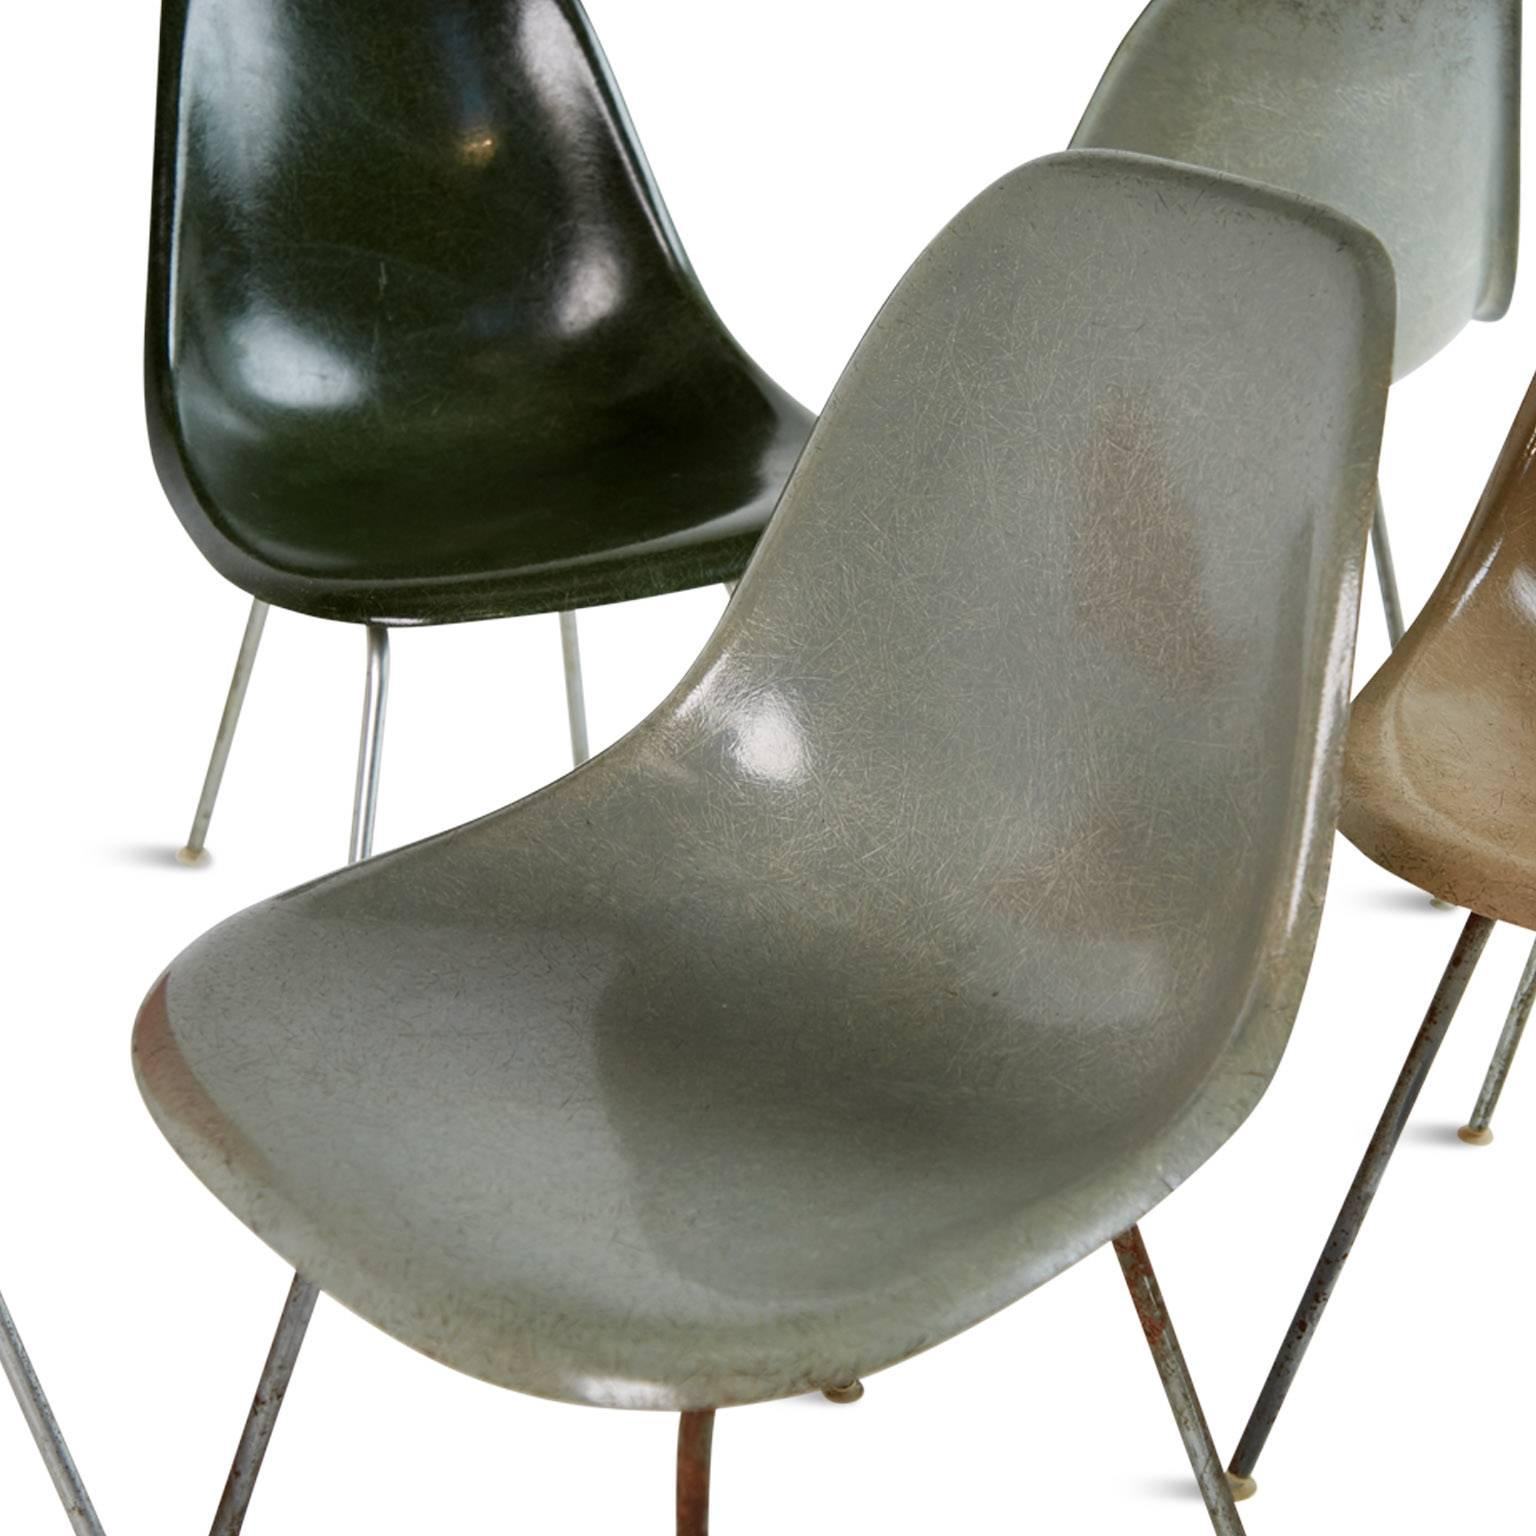 Charles & Ray Eames for Herman Miller Fiberglass DSX Chairs, Early Production 1